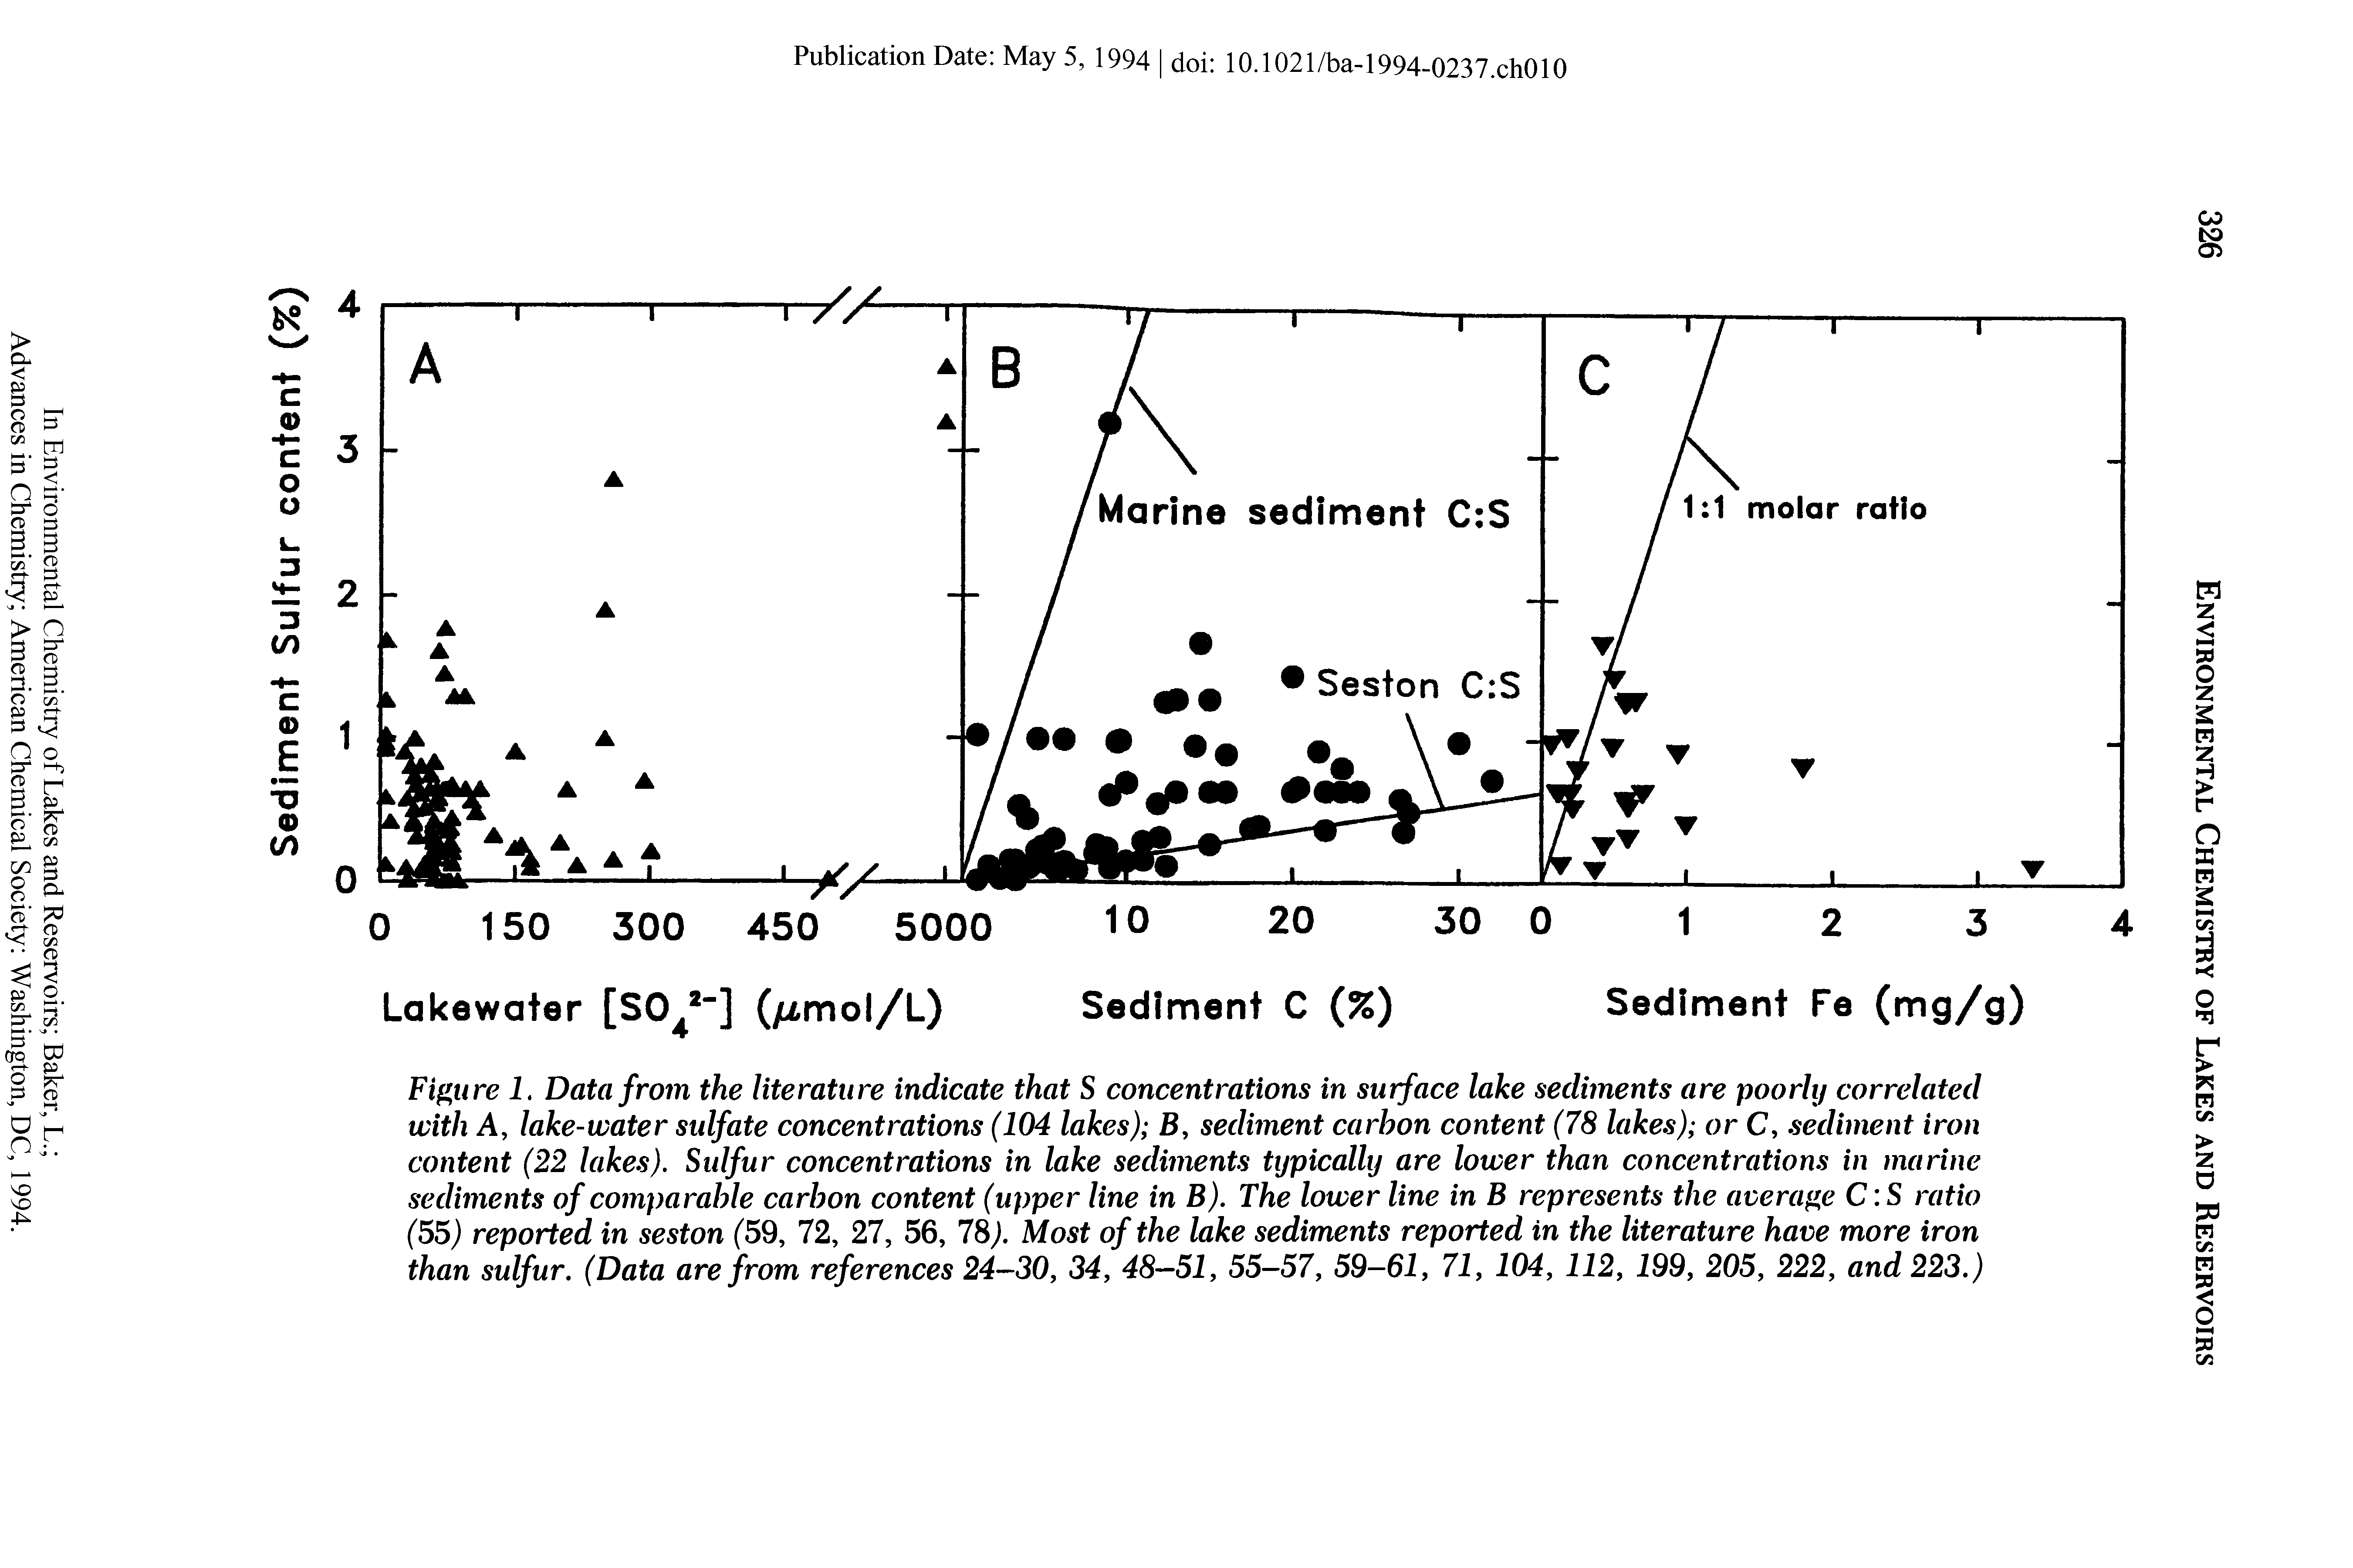 Figure 1. Data from the literature indicate that S concentrations in surface lake sediments are poorly correlated with A, lake-water sulfate concentrations (104 lakes) B, sediment carbon content (78 lakes) or C, sediment iron content (22 lakes). Sulfur concentrations in lake sediments typically are lower than concentrations in marine sediments of comparable carbon content (upper line in B). The lower line in B represents the average C S ratio (55) reported in seston (59, 72, 27, 56, 78). Most of the lake sediments reported in the literature have more iron than sulfur. (Data are from references 24-30, 34, 48—51, 55-57, 59-61, 71, 104, 112, 199, 205, 222, and 223.)...